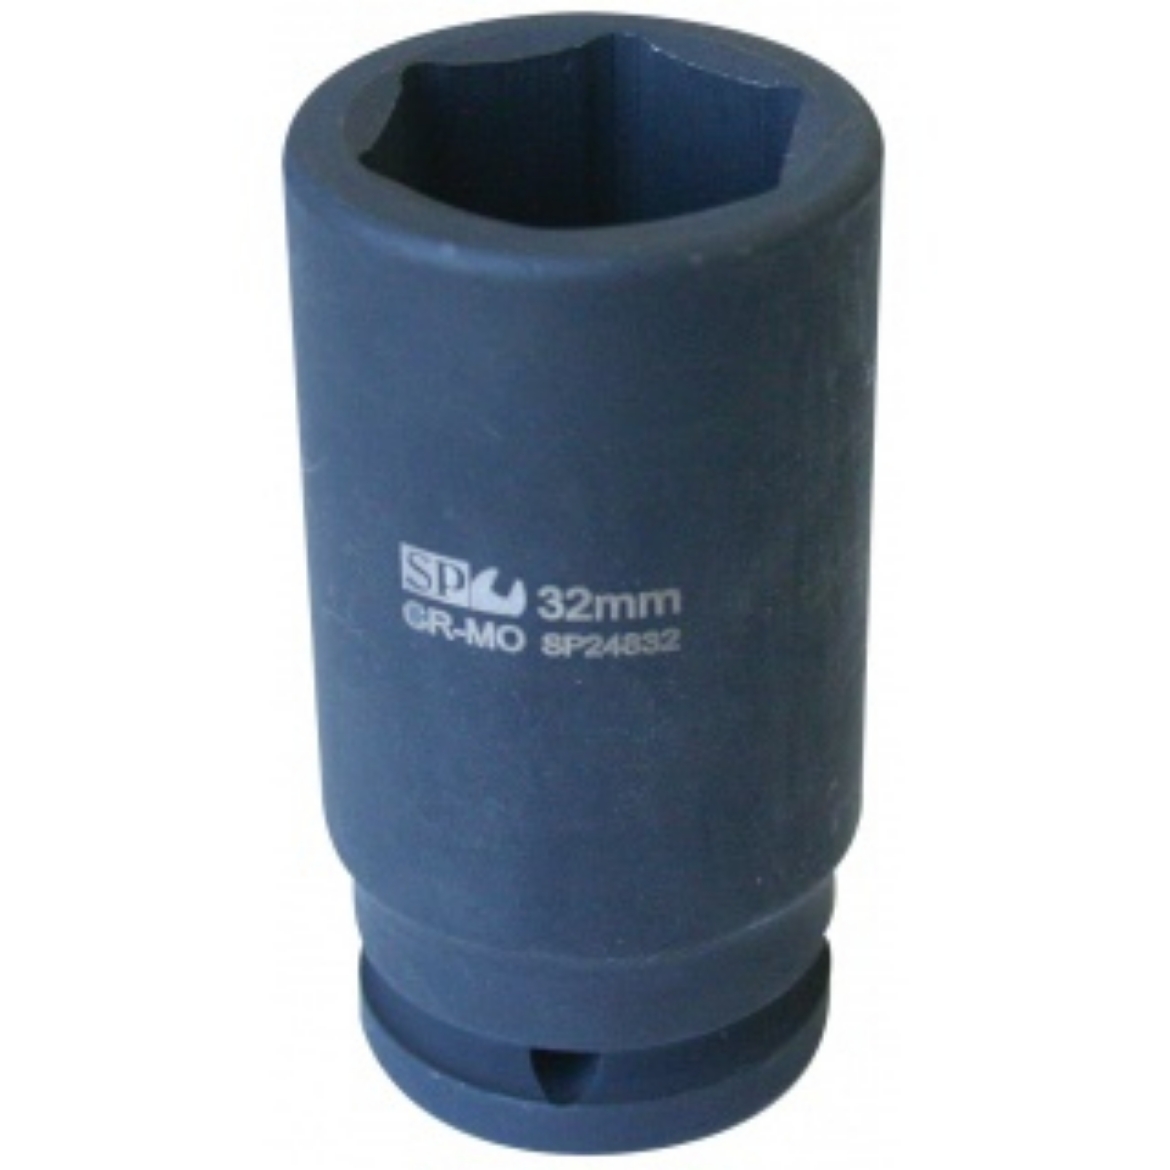 Picture of SOCKET IMPACT 3/4"DR 6PT DEEP METRIC 19MM SP TOOLS